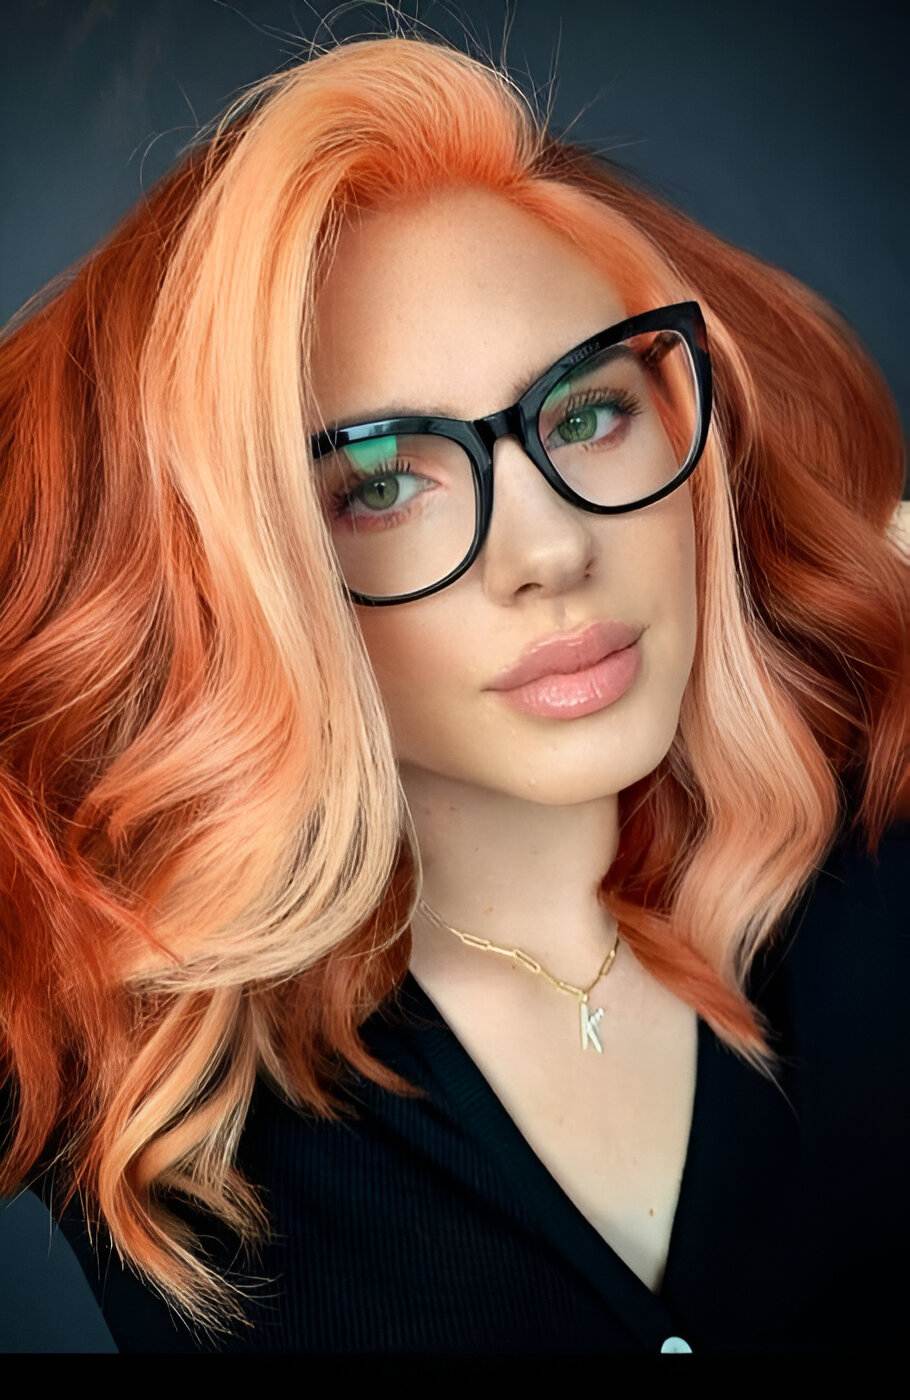 25 Gorgeous Orange Hair Ideas To Look Stunning Like A Model - 197